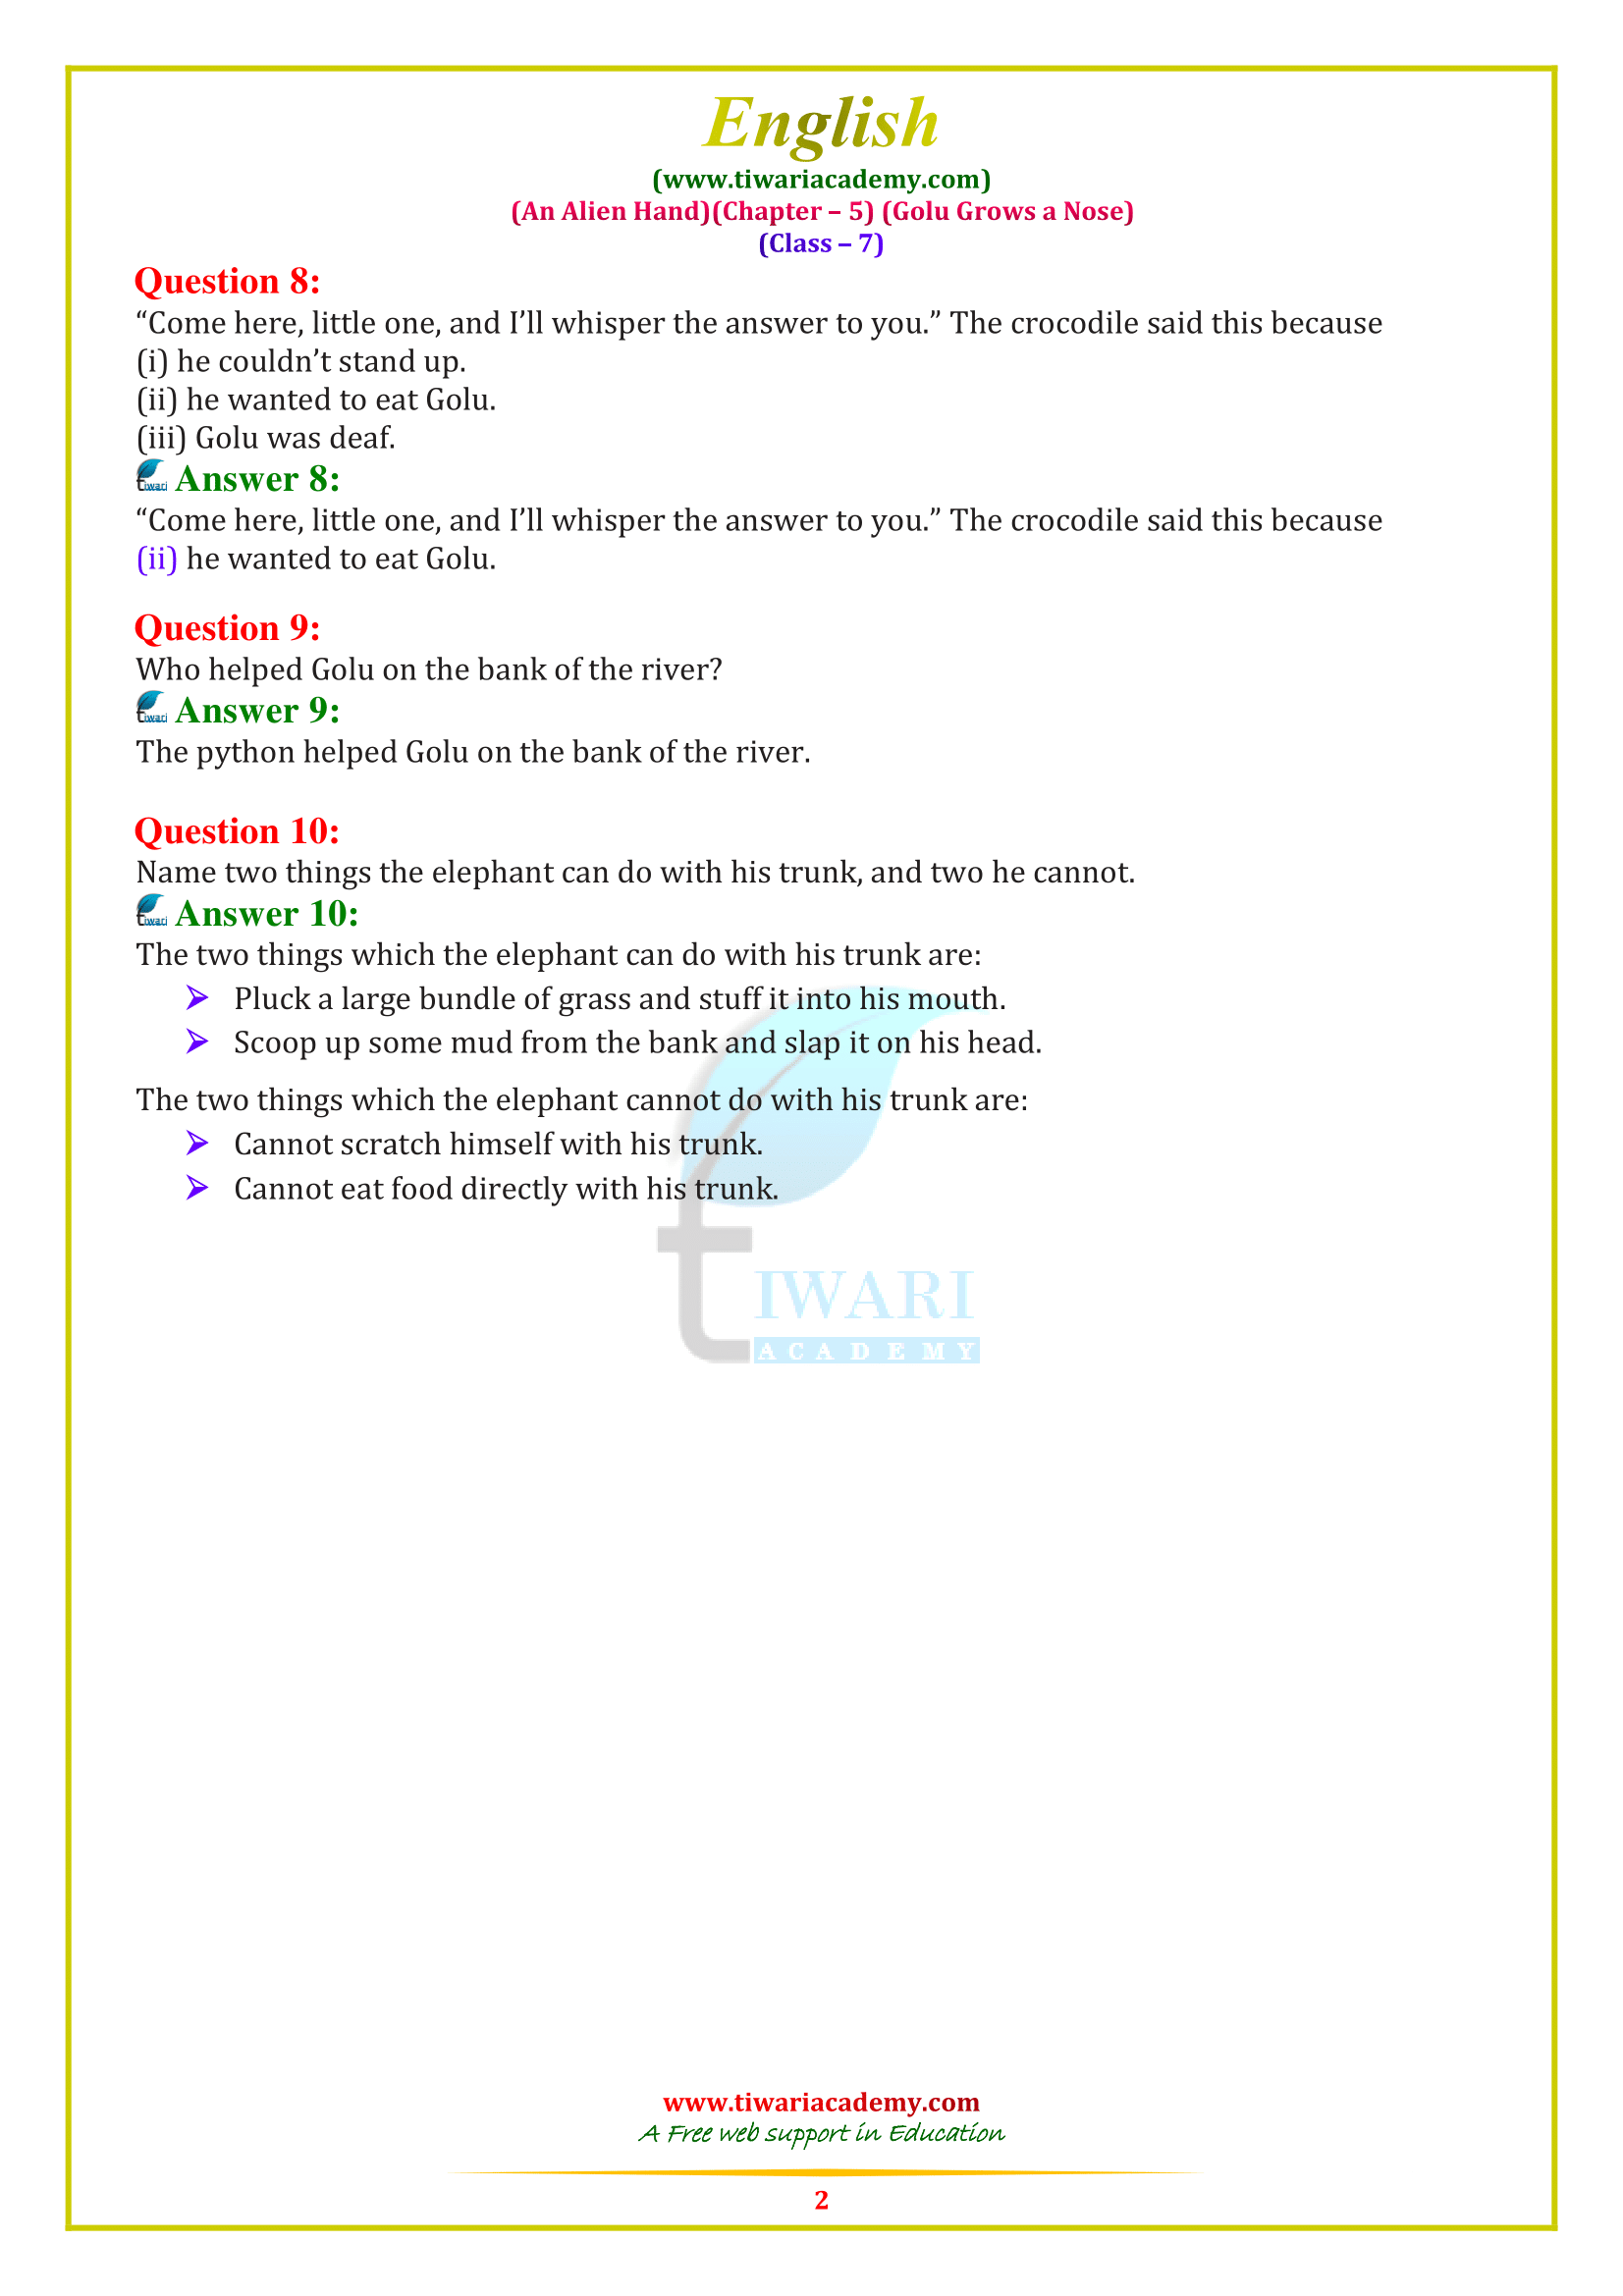 7th English An Alien hand chapter 5